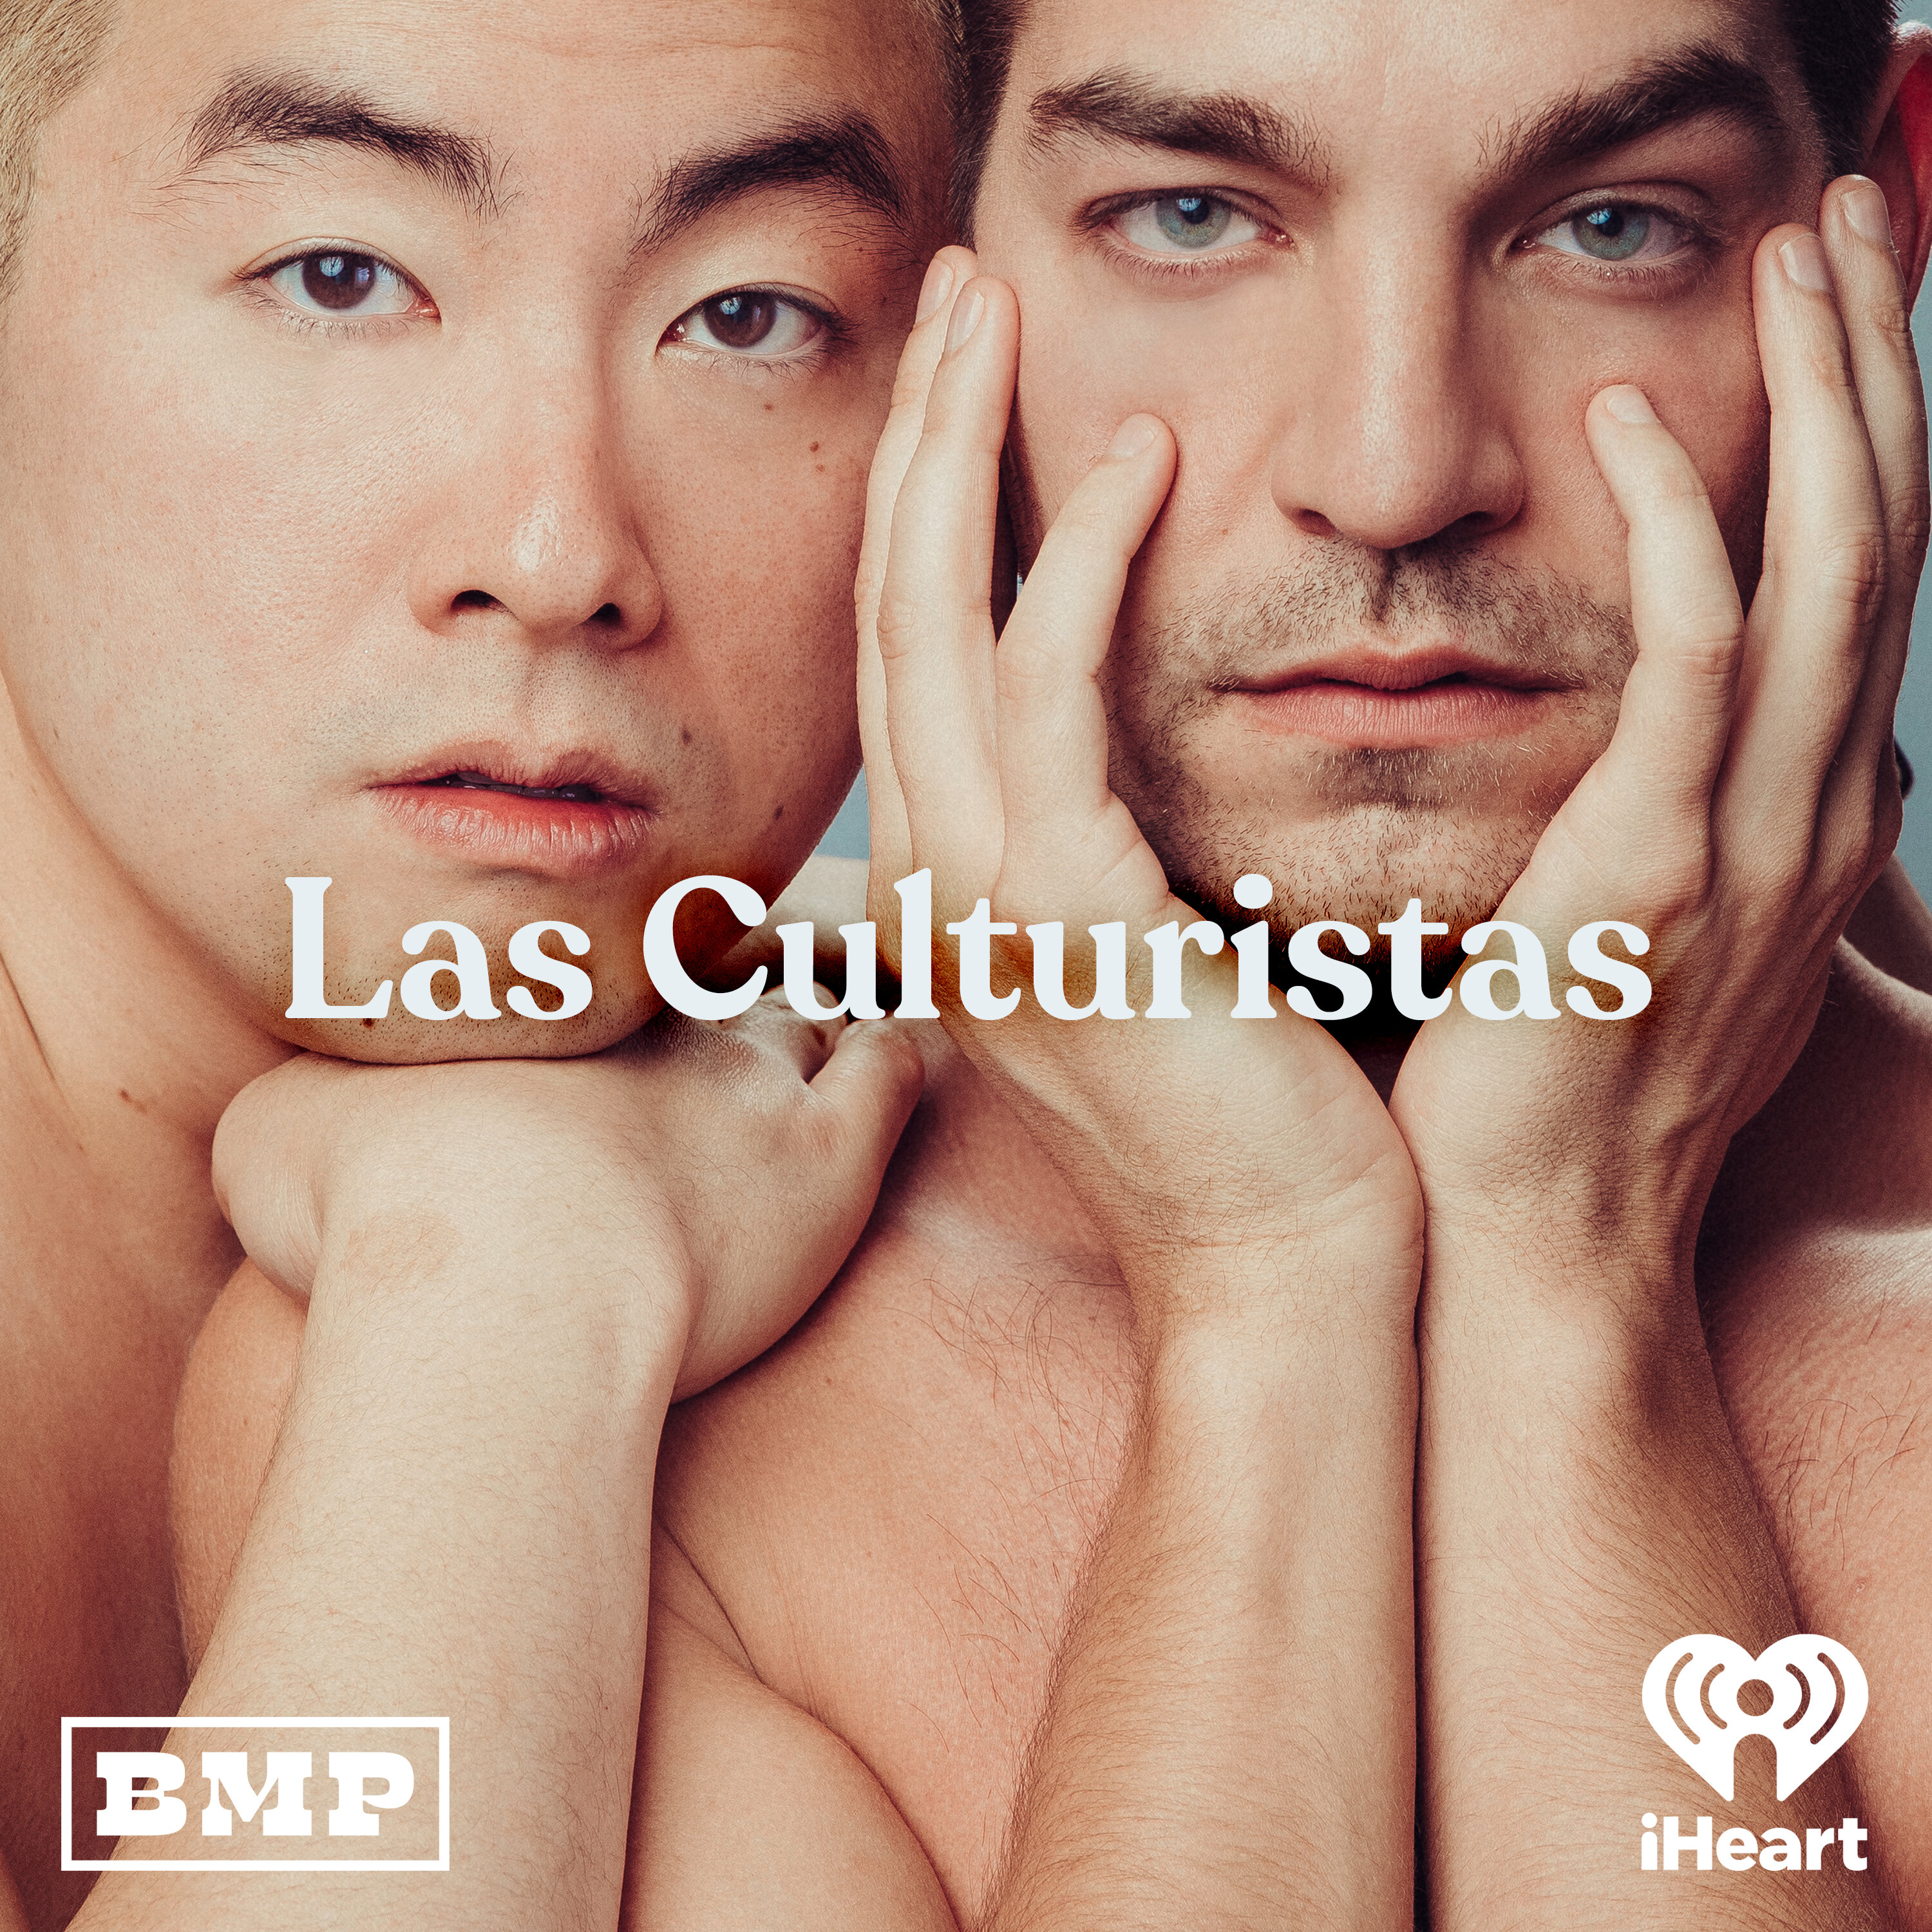 Las Culturistas with Matt Rogers and Bowen Yang podcast show image